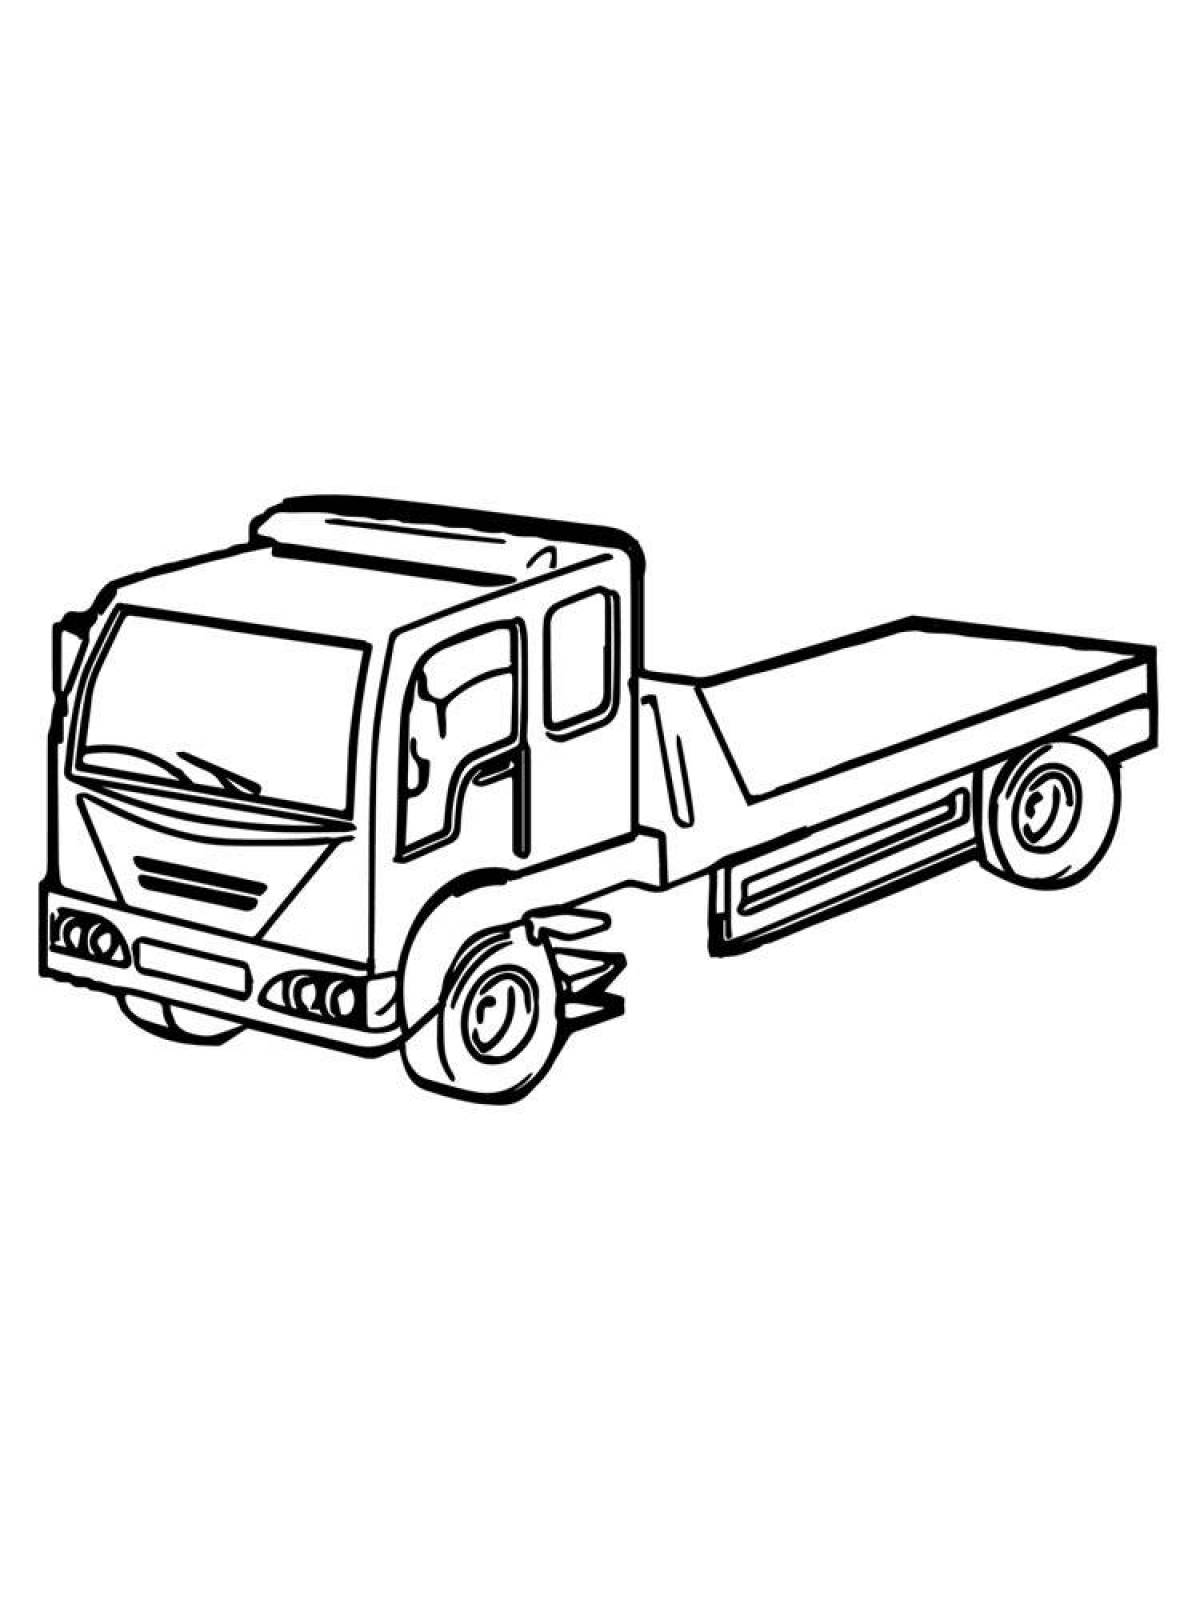 Colorful tow truck coloring page